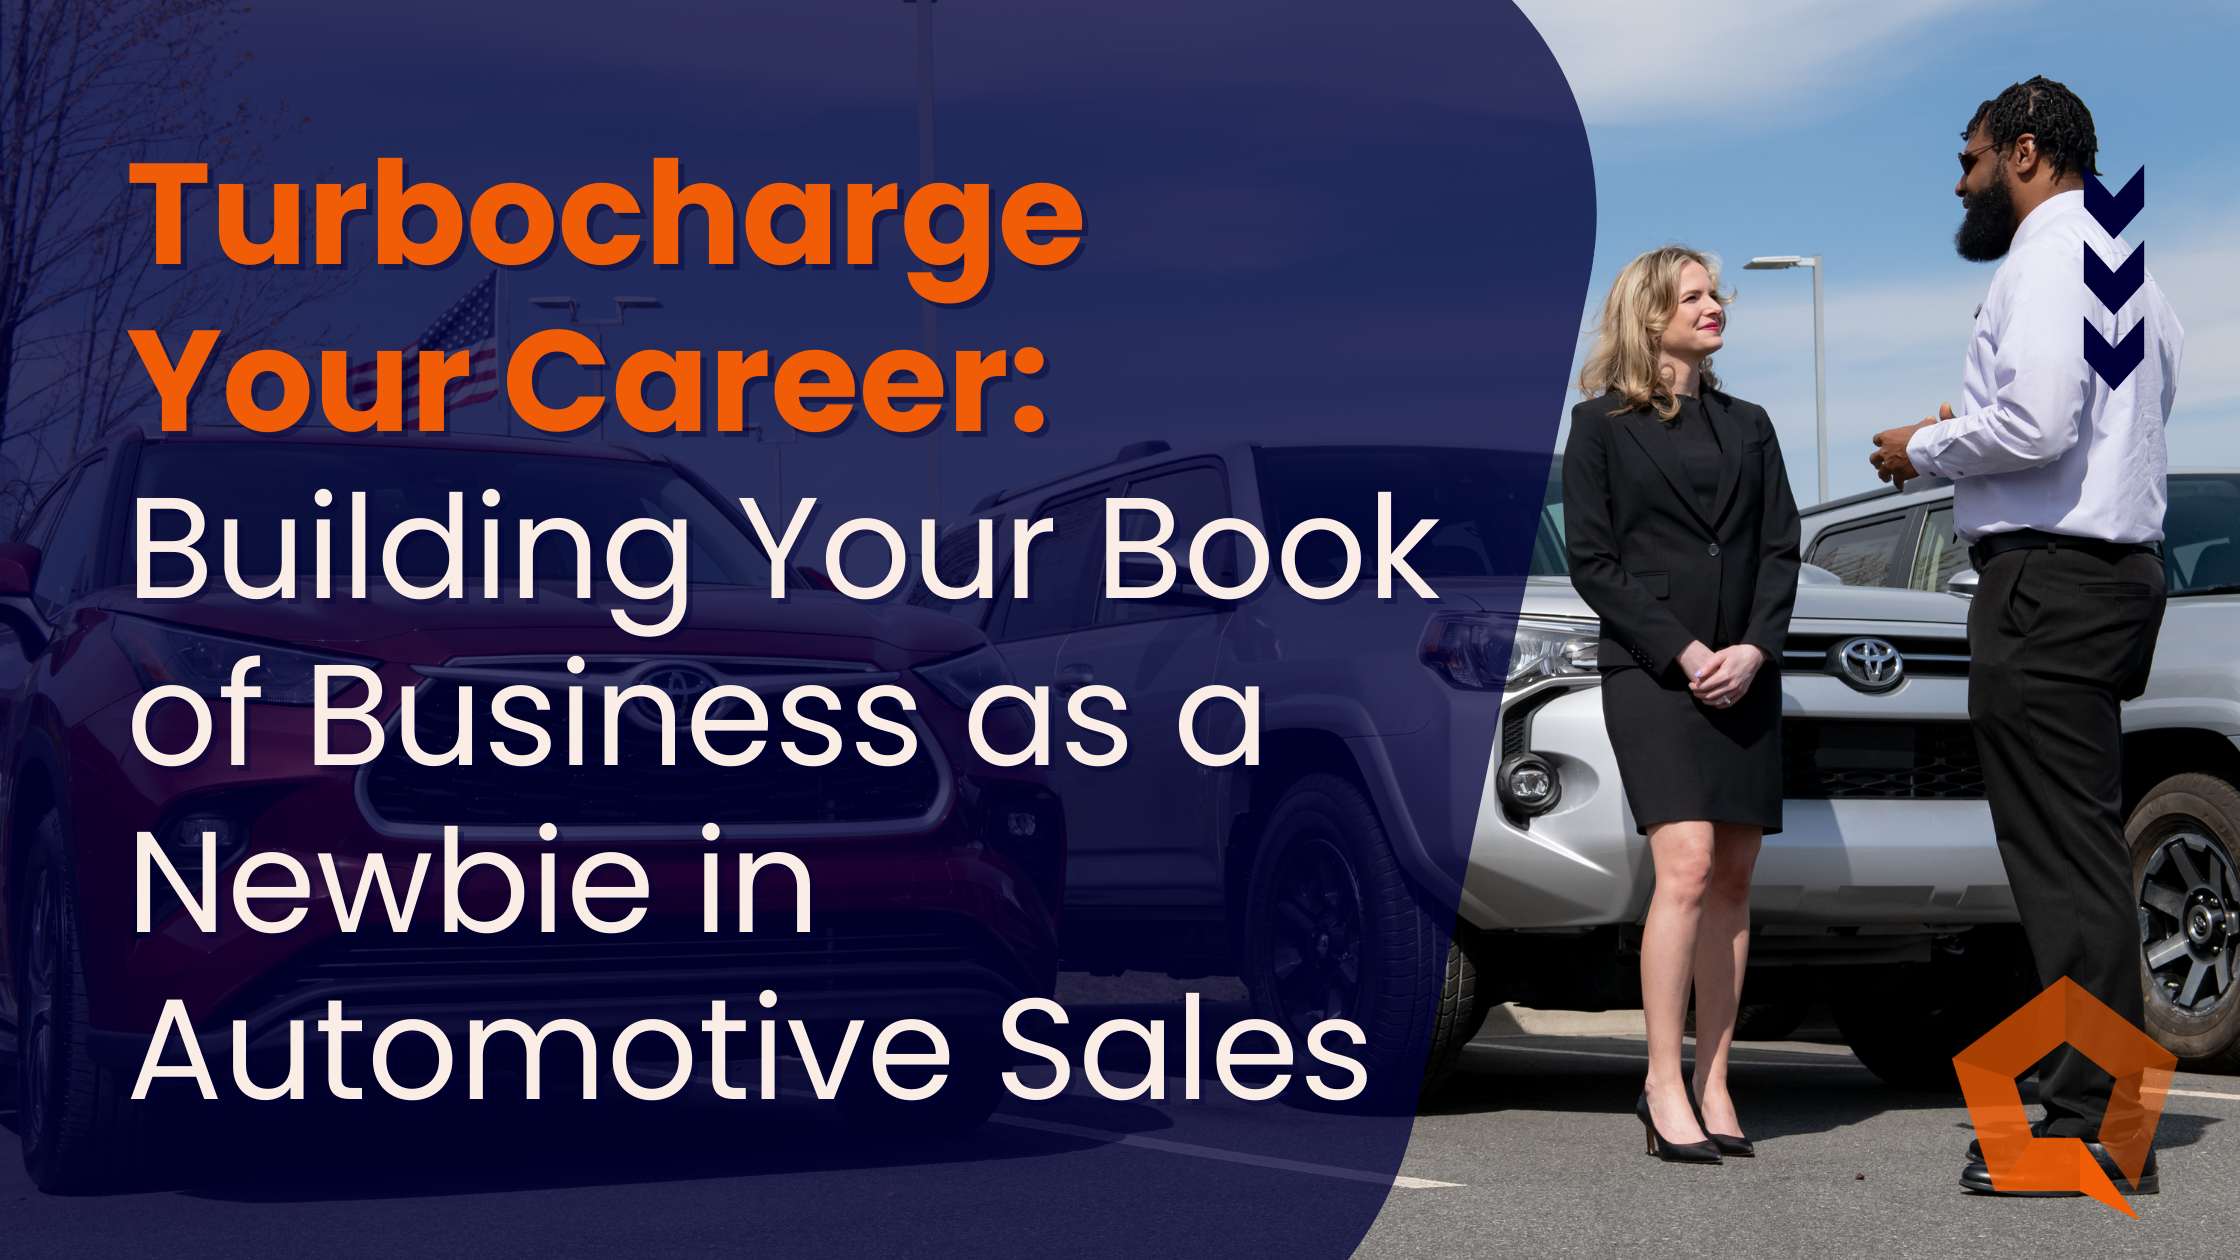 Turbocharge Your Career: Building Your Book of Business as a Newbie in Automotive Sales 